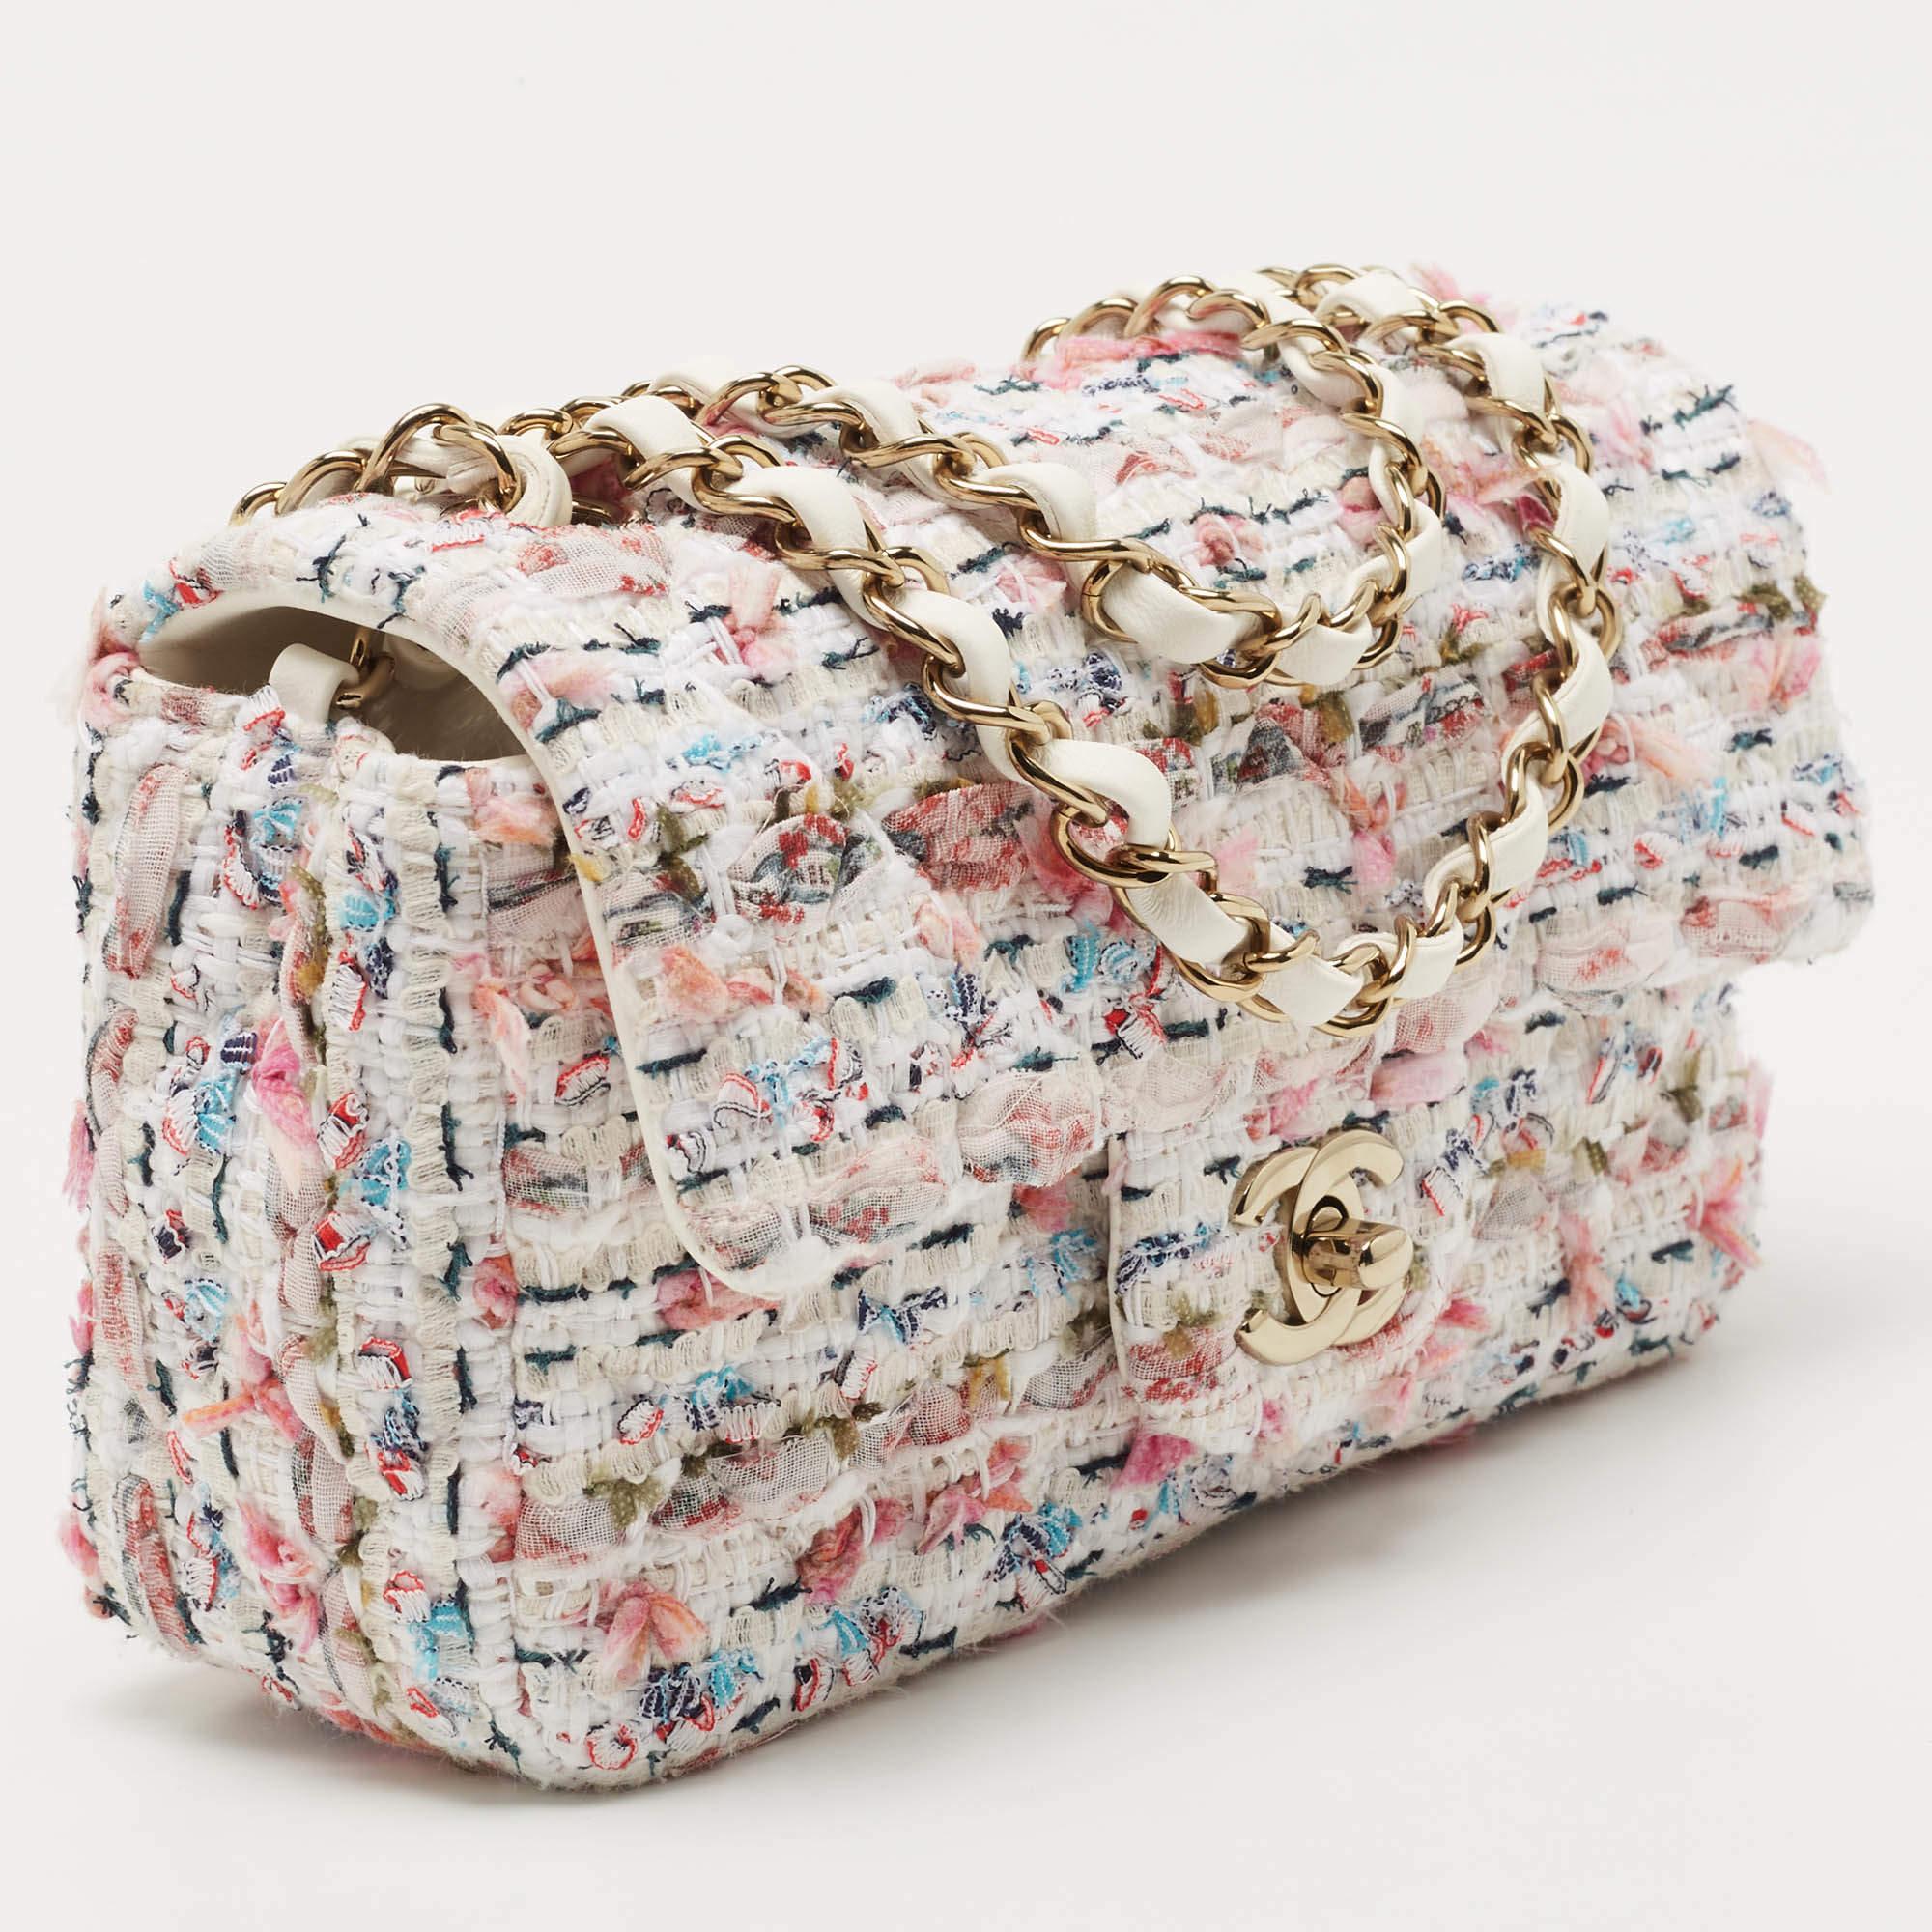 Women's Chanel White/Multiicolor Quilted Tweed New Mini Classic Flap Bag